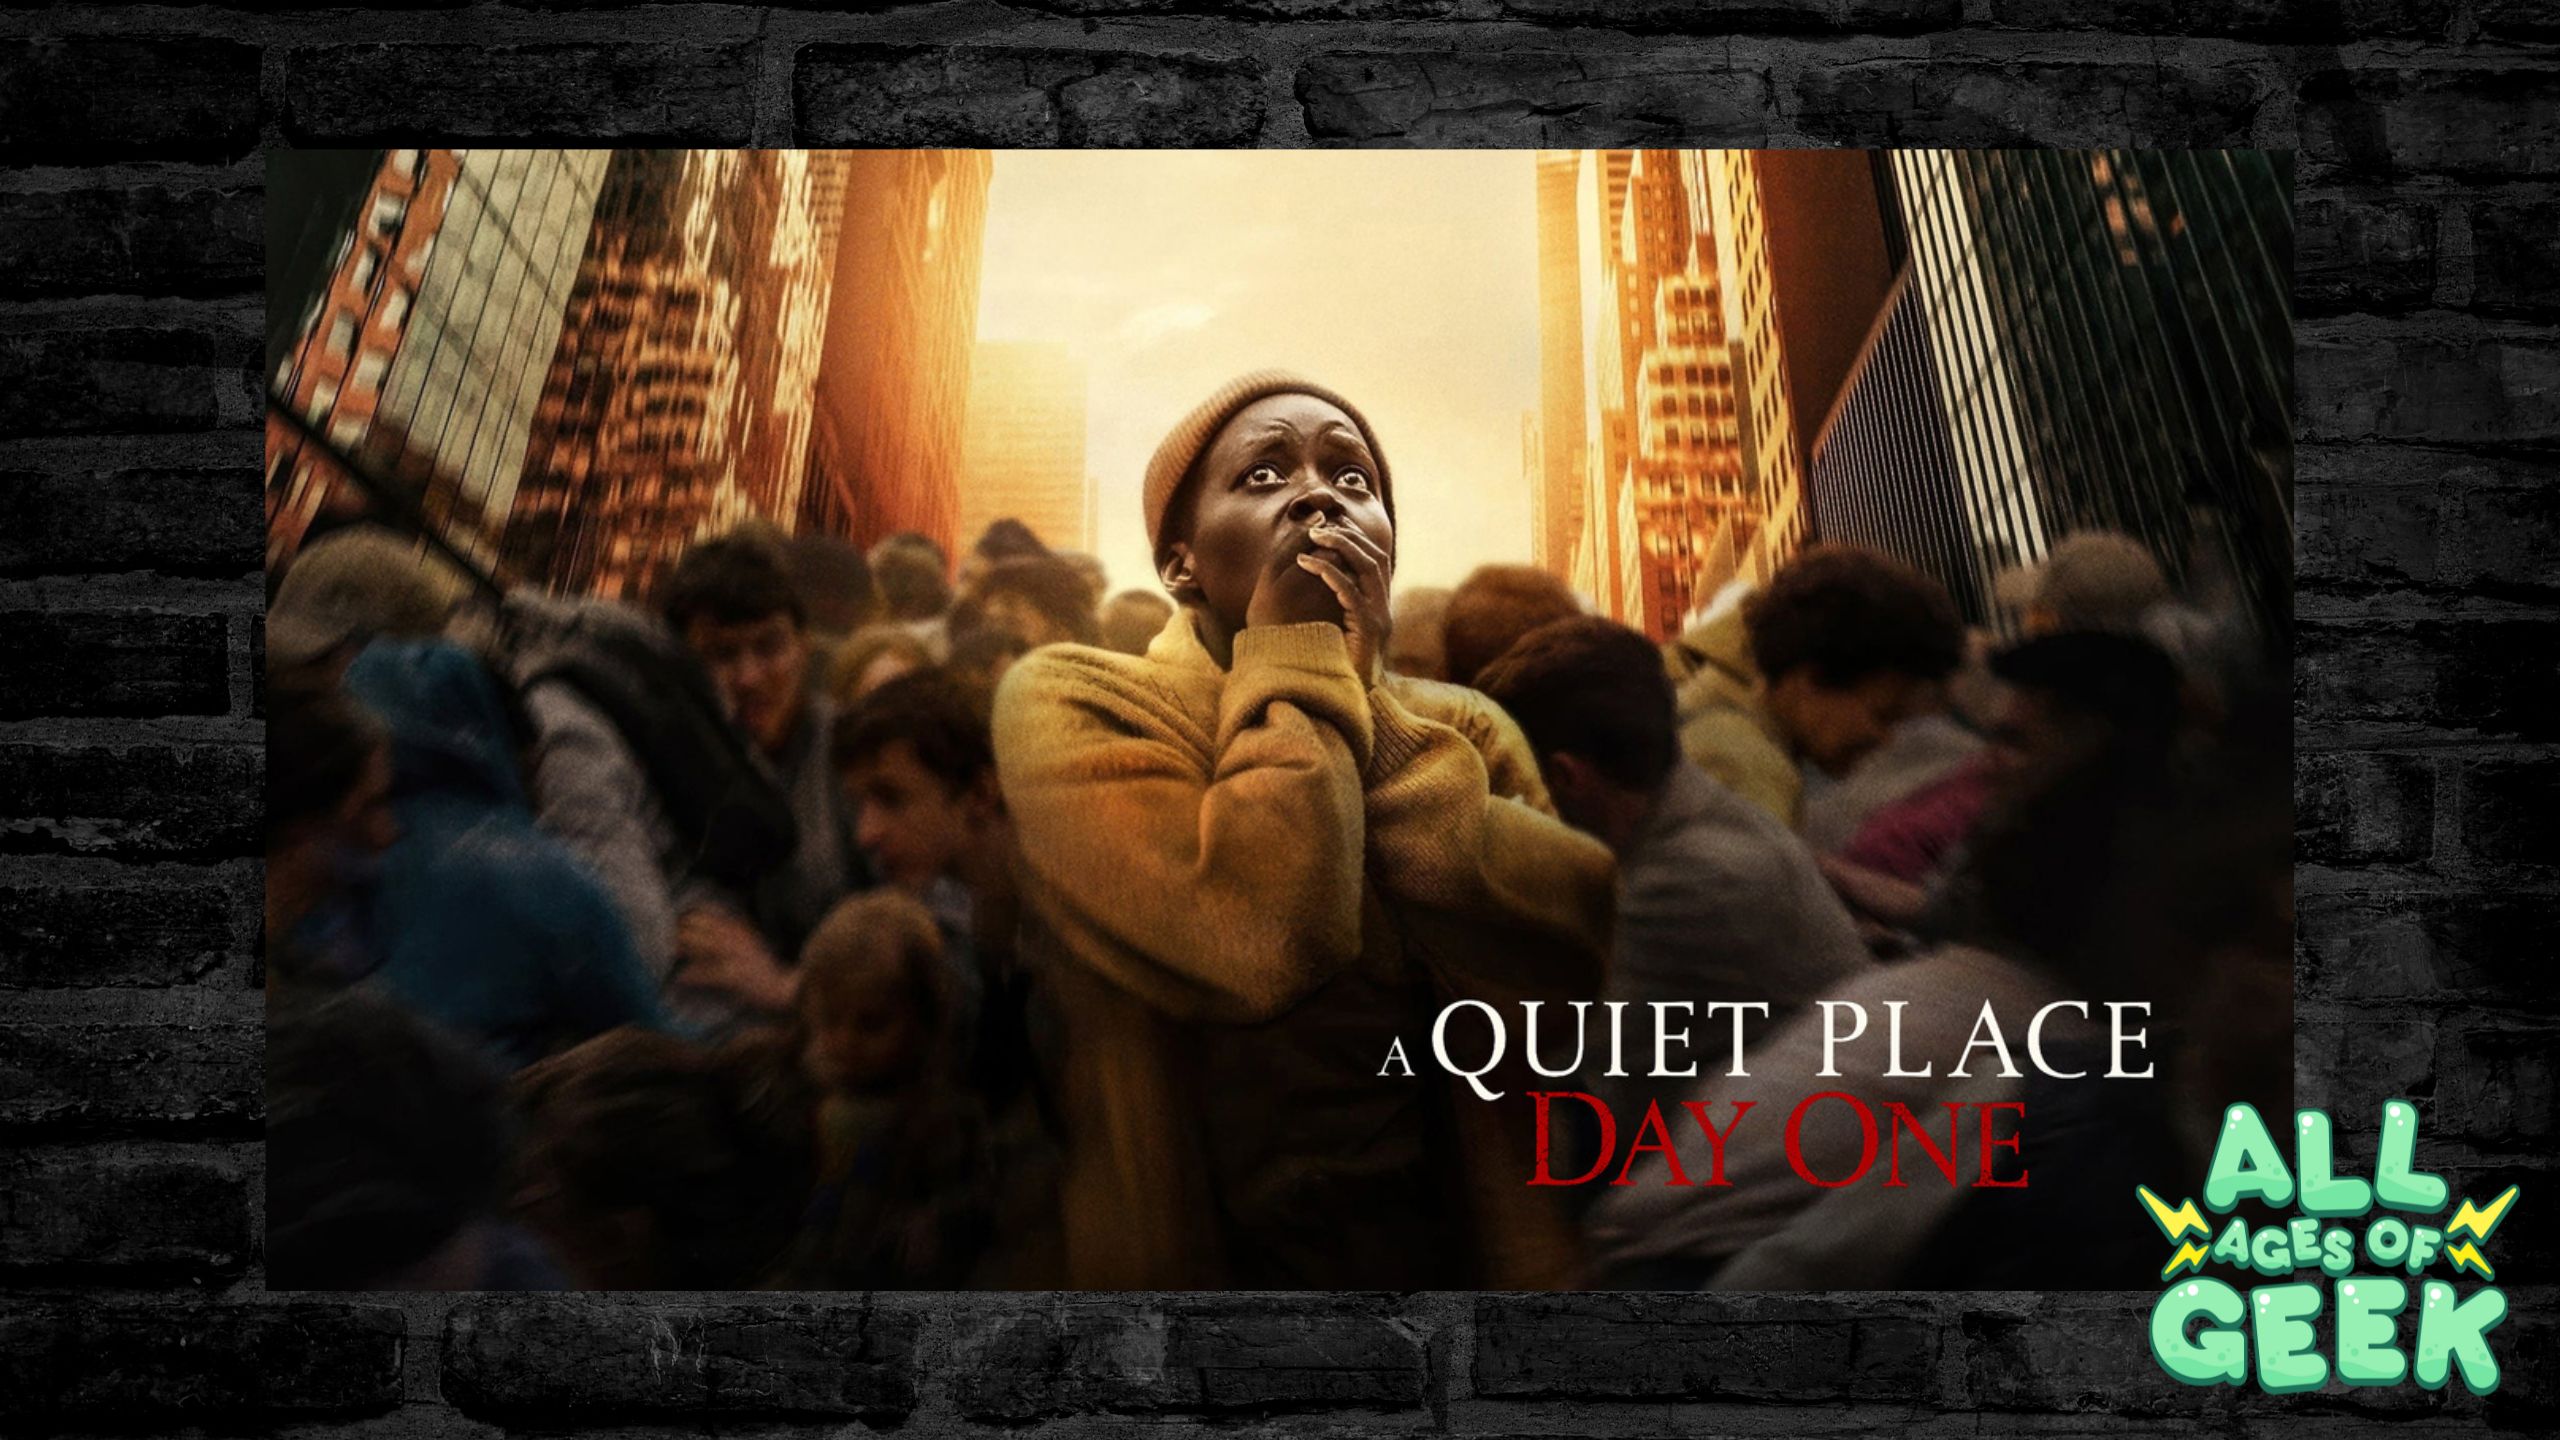 A promotional image for "A Quiet Place: Day One" featuring a woman in a yellow coat looking terrified amidst a crowd in a city setting. The background showcases tall buildings bathed in a warm light. The All Ages of Geek logo is visible in the bottom right corner.